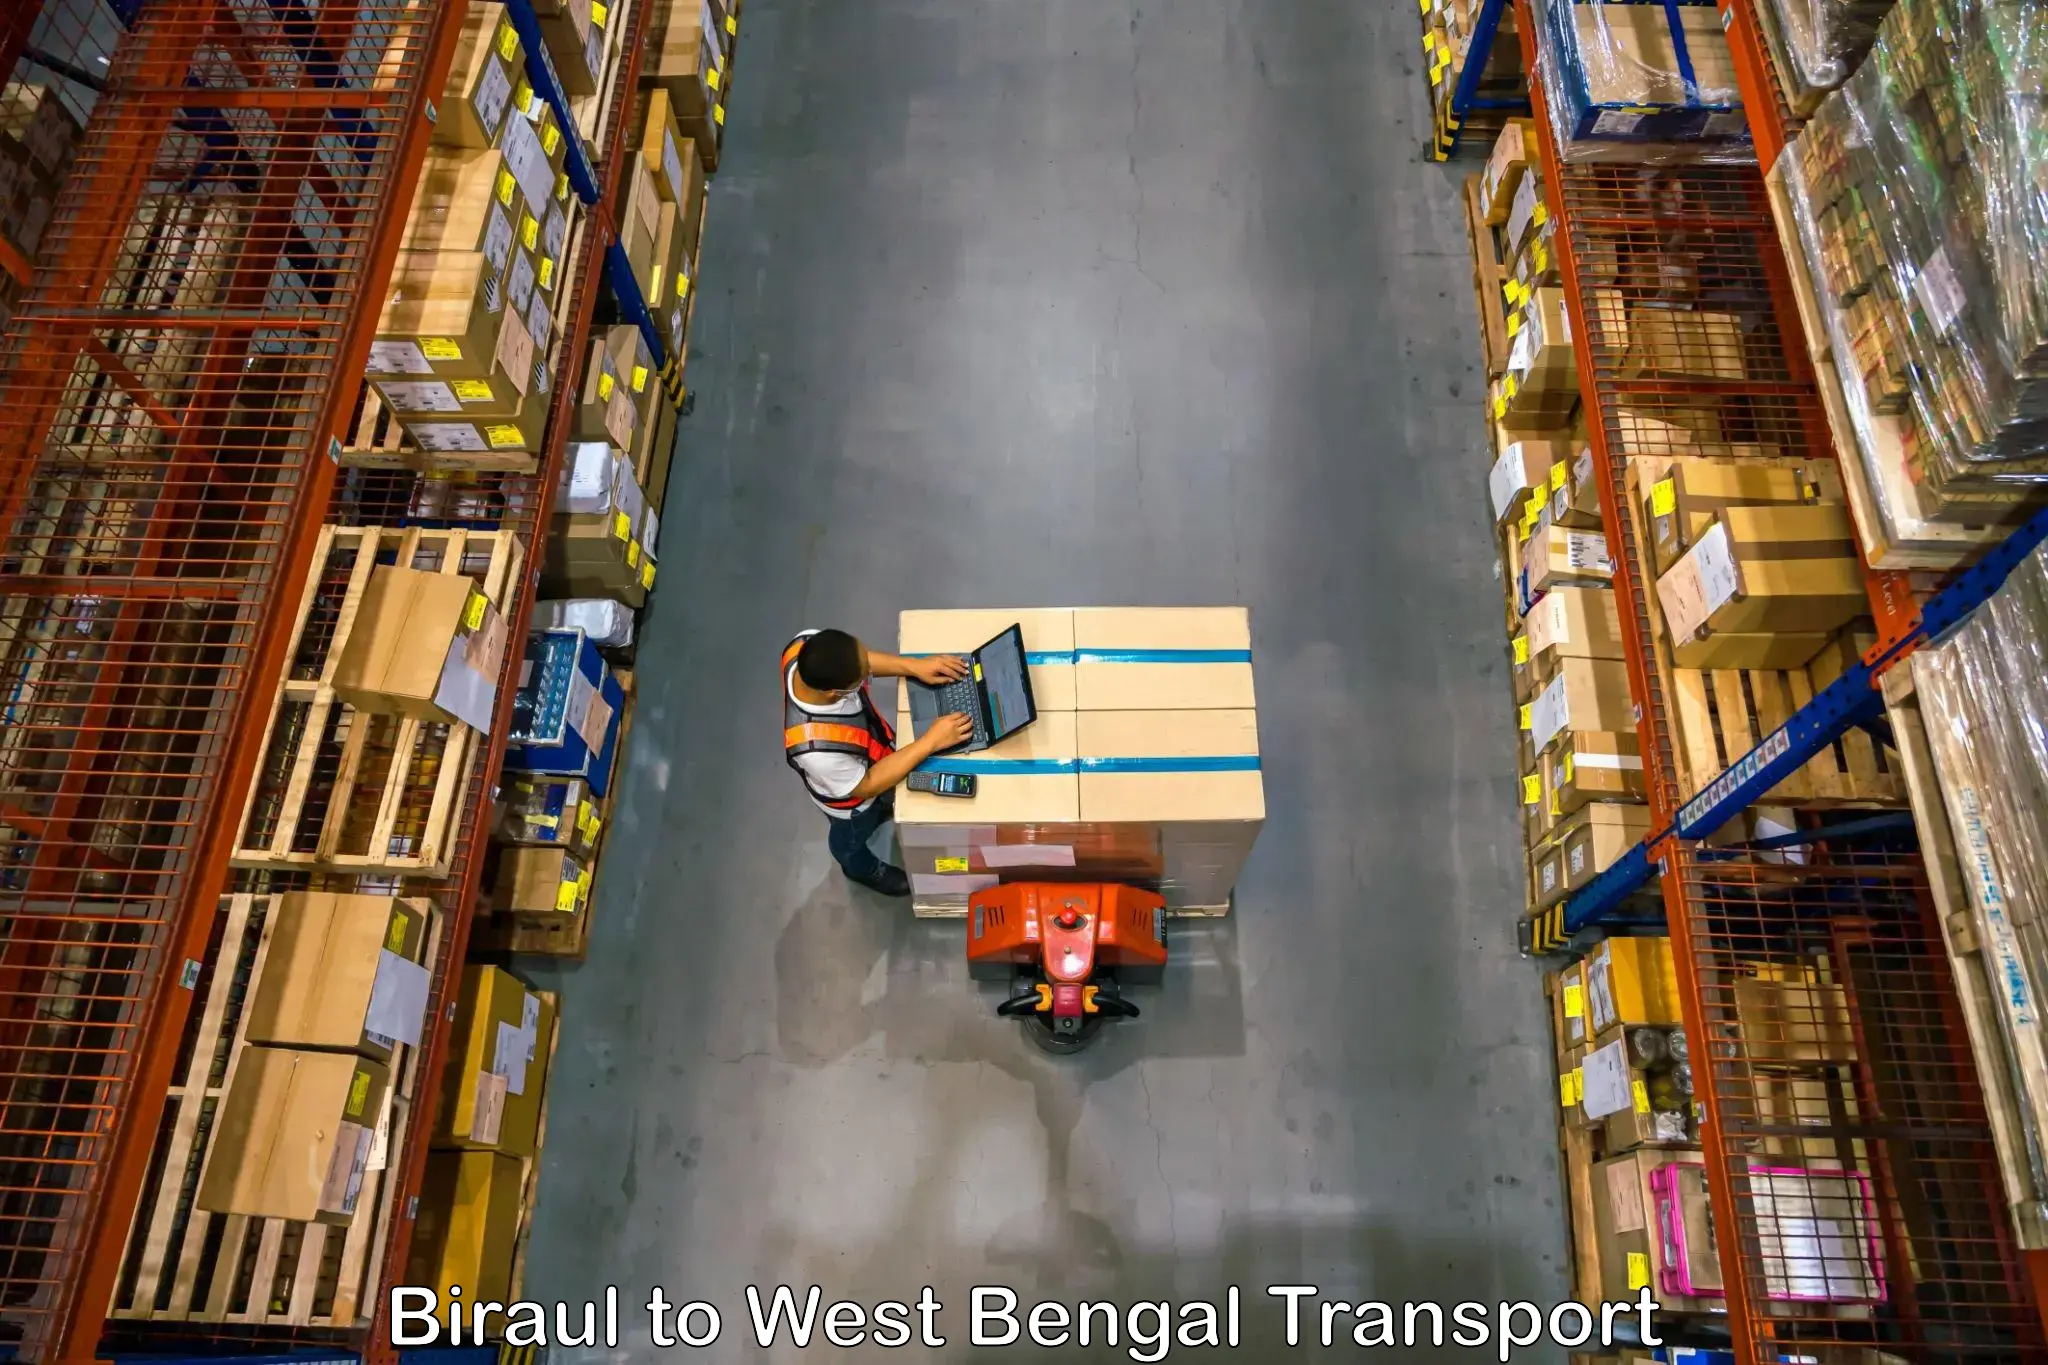 Express transport services in Biraul to Midnapore